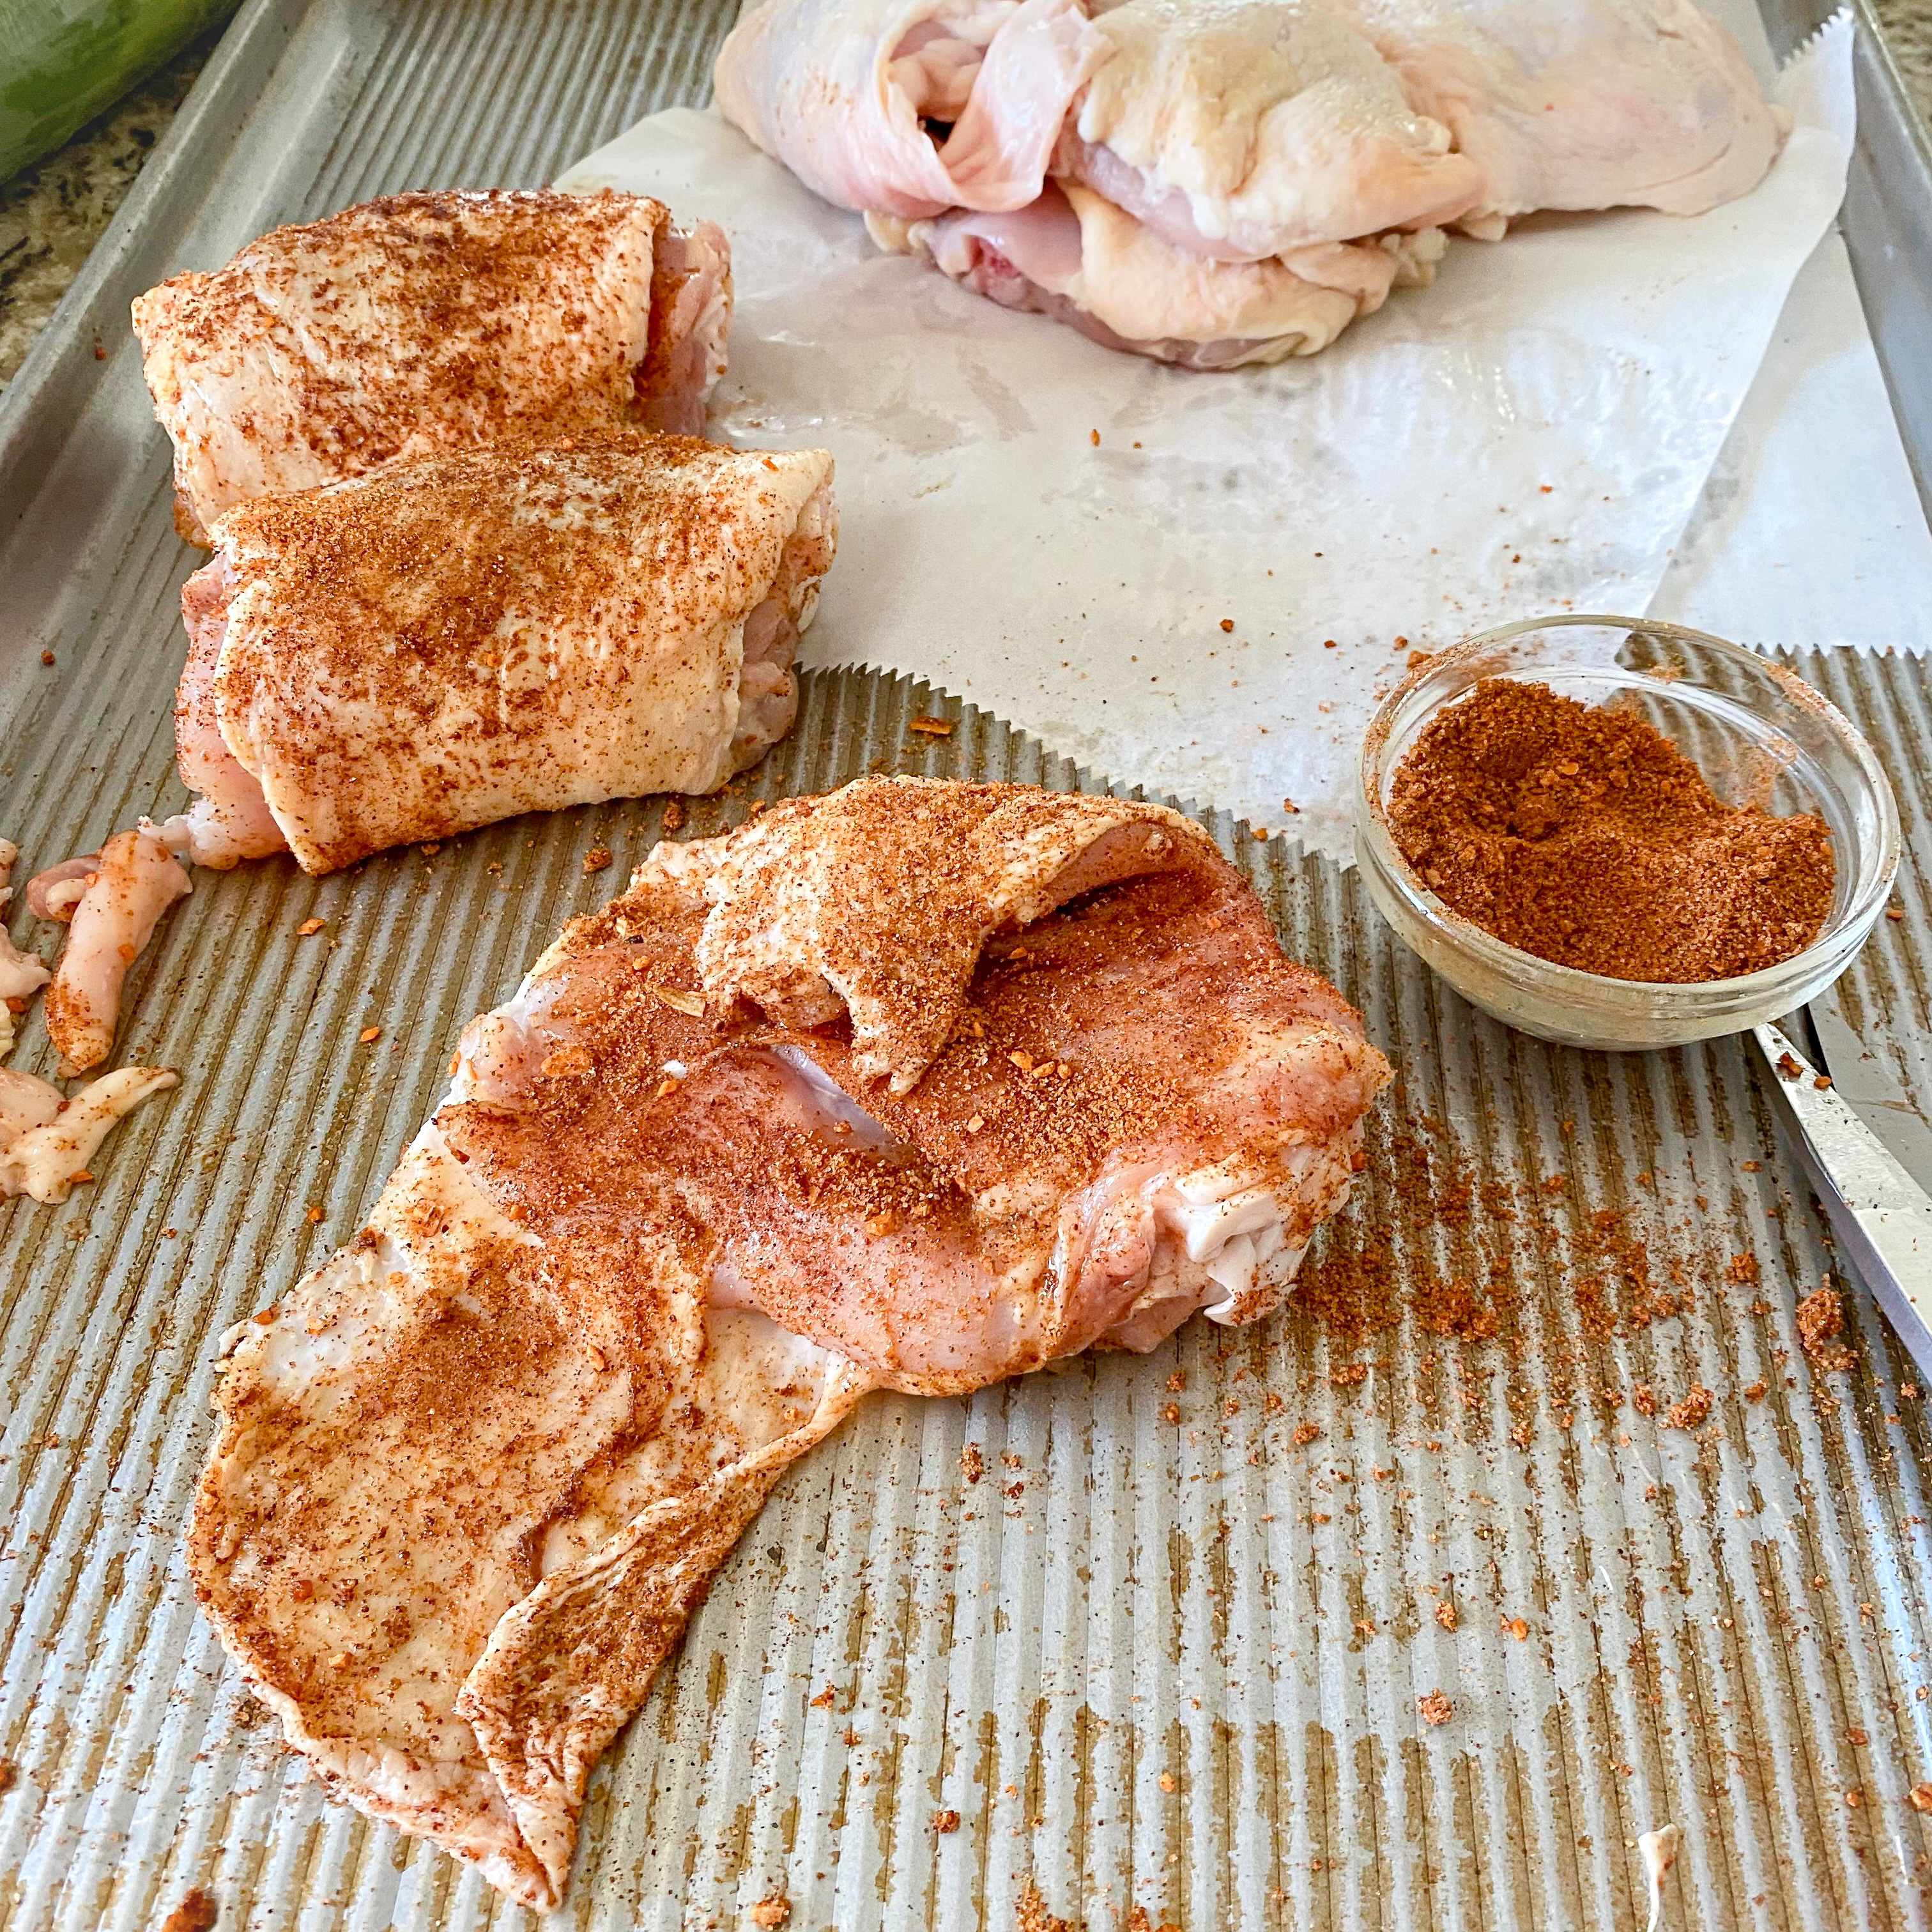 Lay chicken thigh, skin side down. Stretch any extra skin and season. 